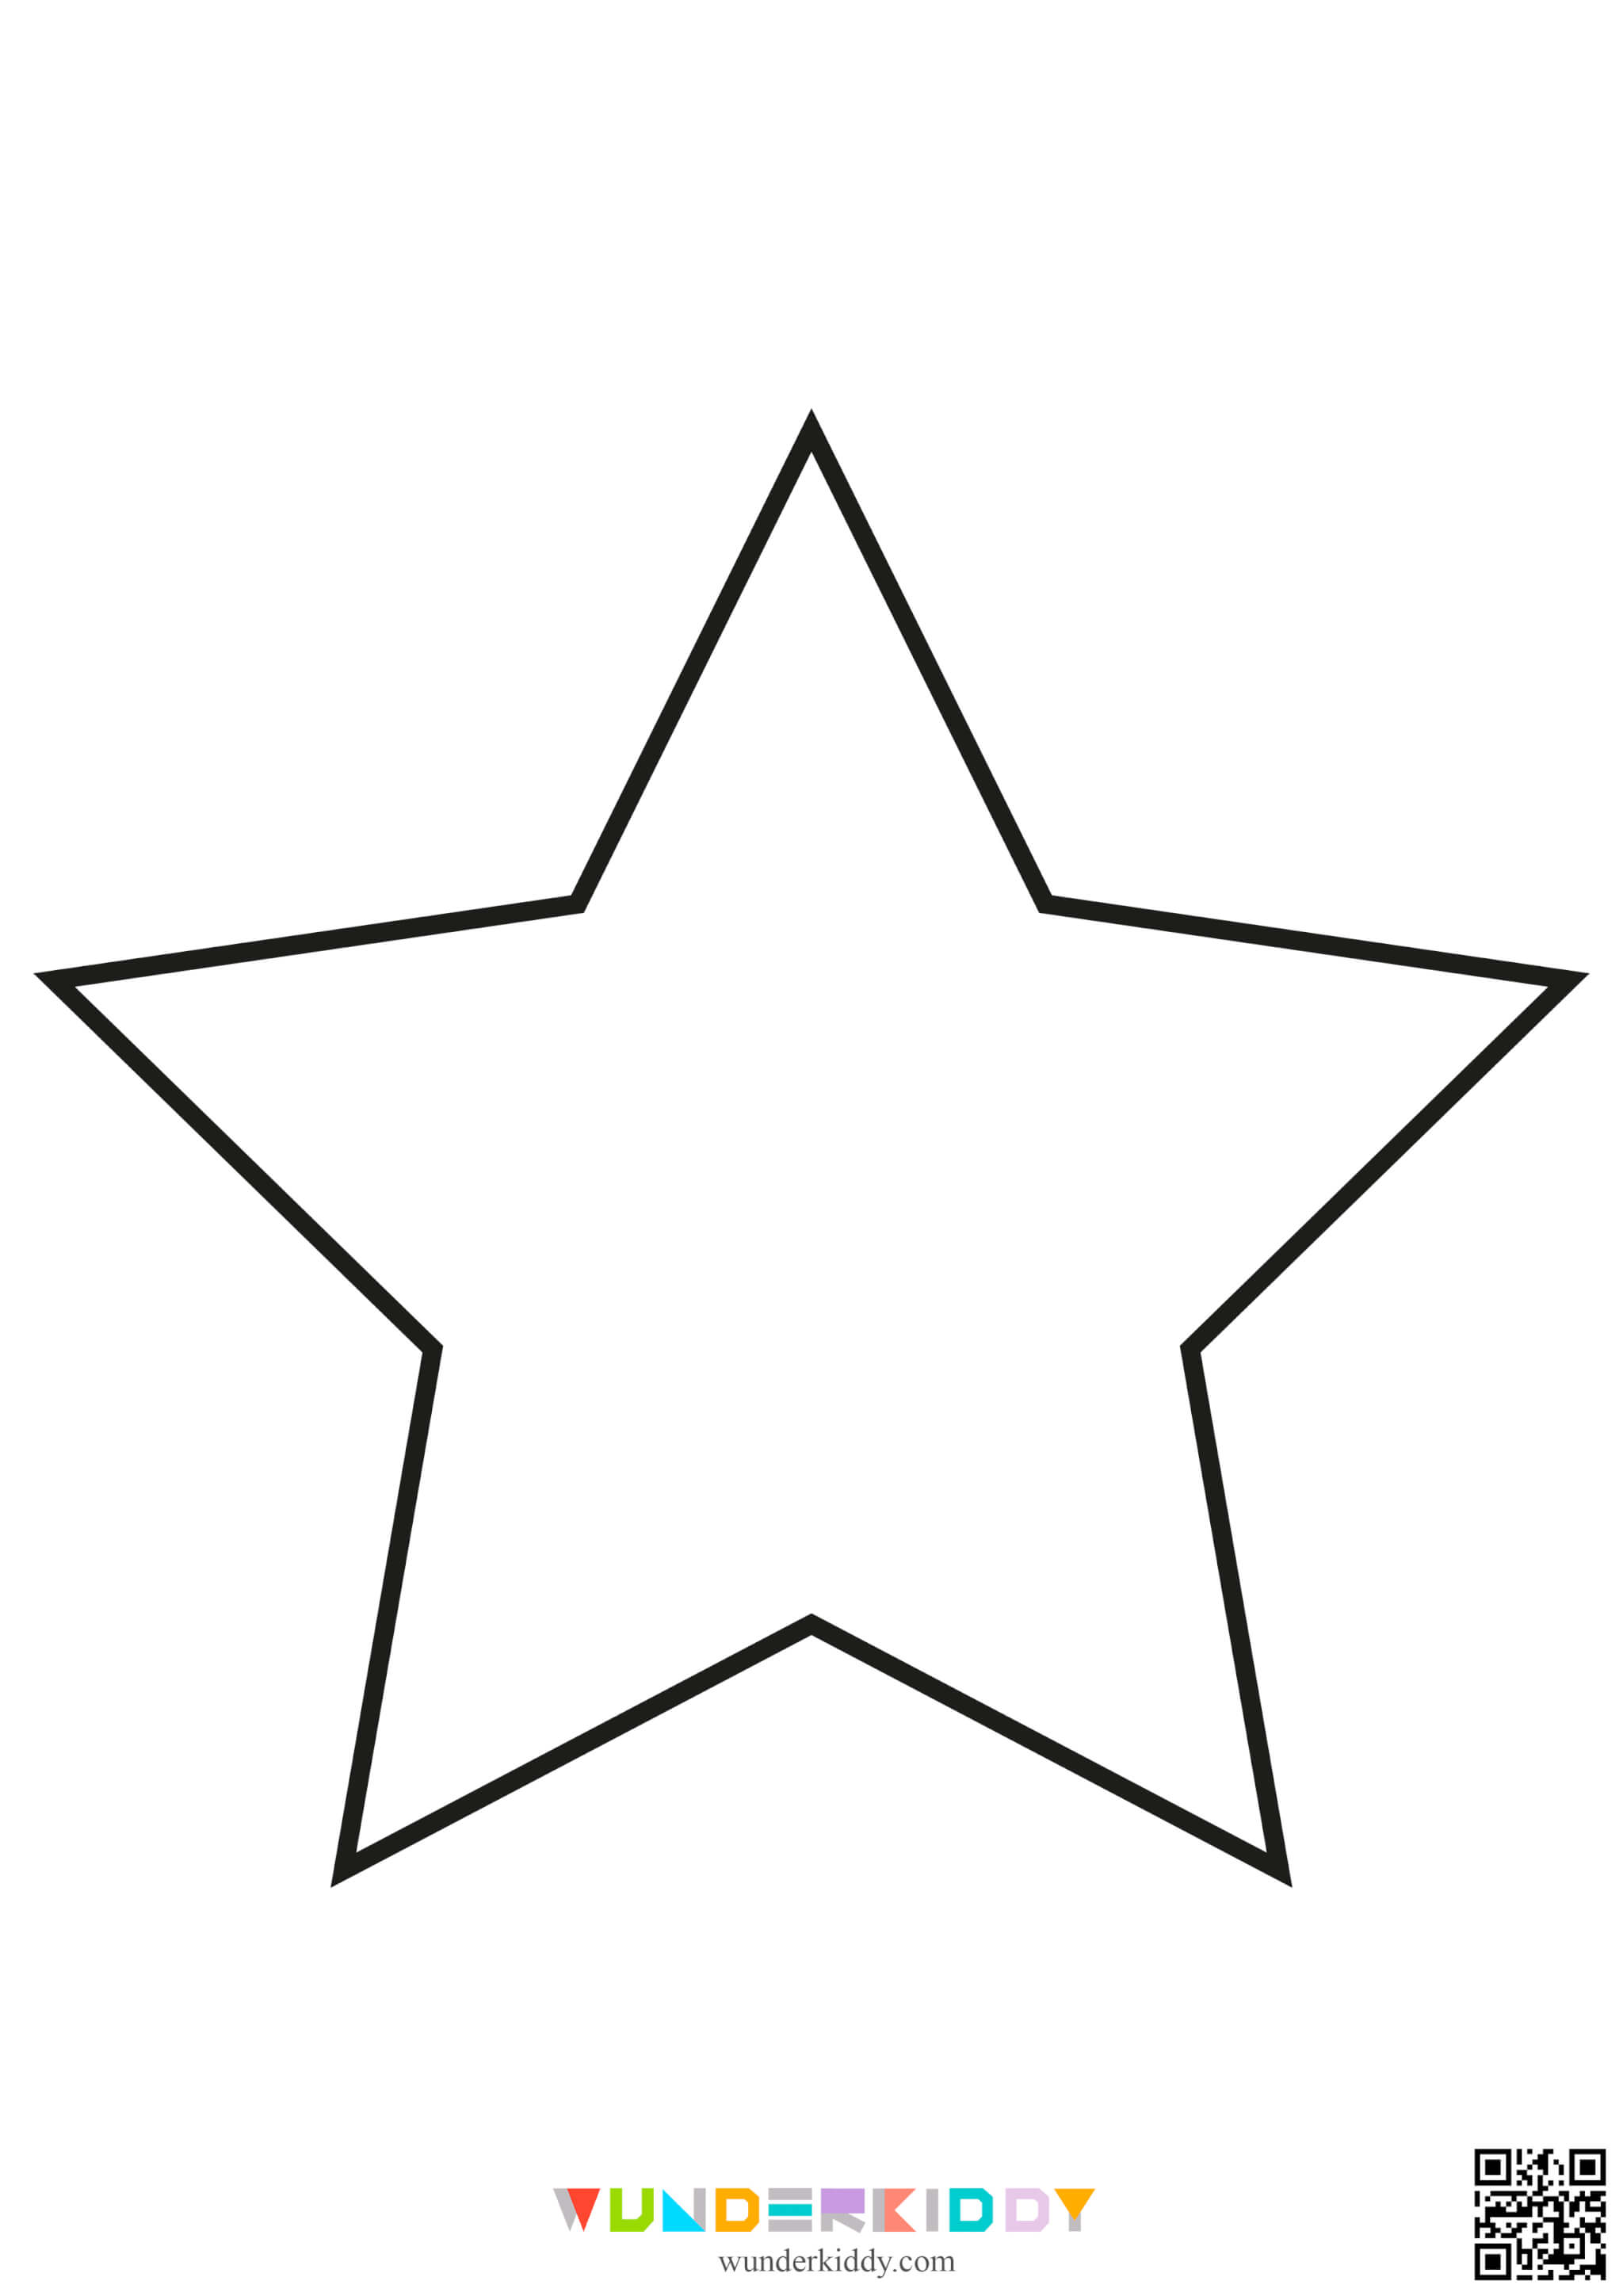 Star Outlines Templates - Image 2